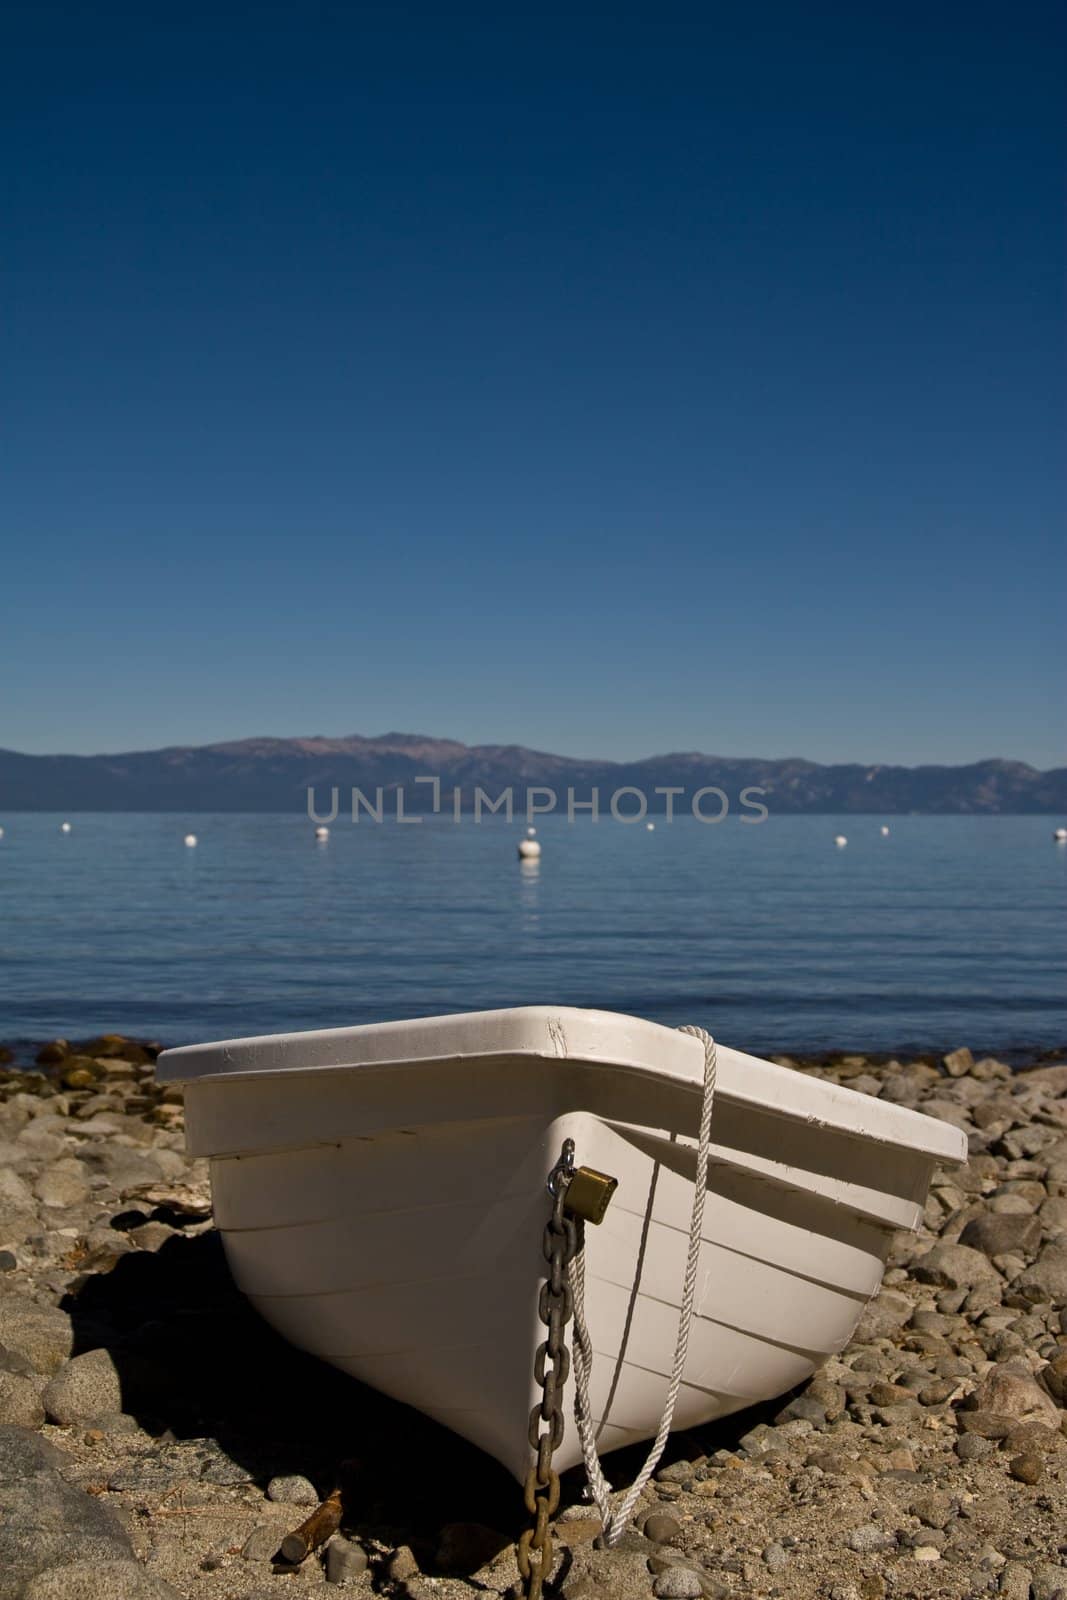 Single plastic boat beached on rocks, lake in background with mountains beyond